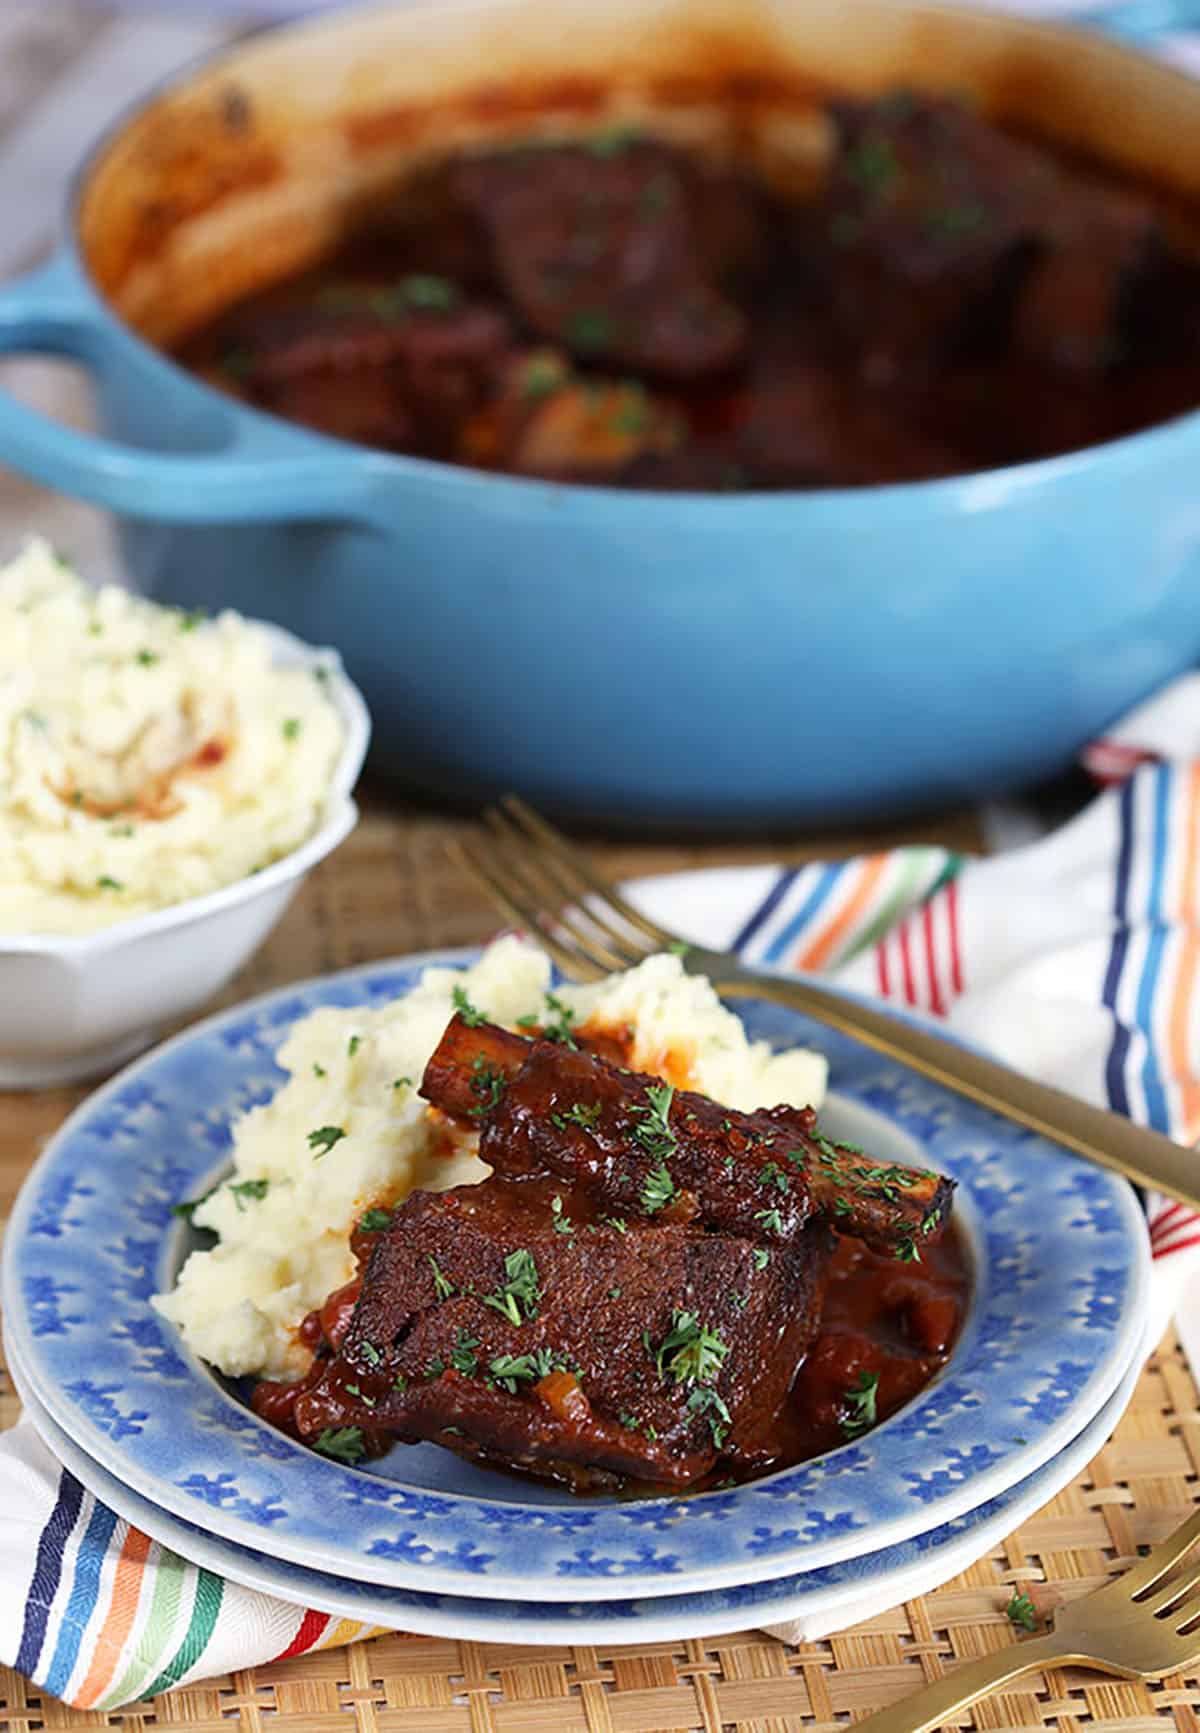 Braised Short Ribs on a blue plate with mashed potatoes